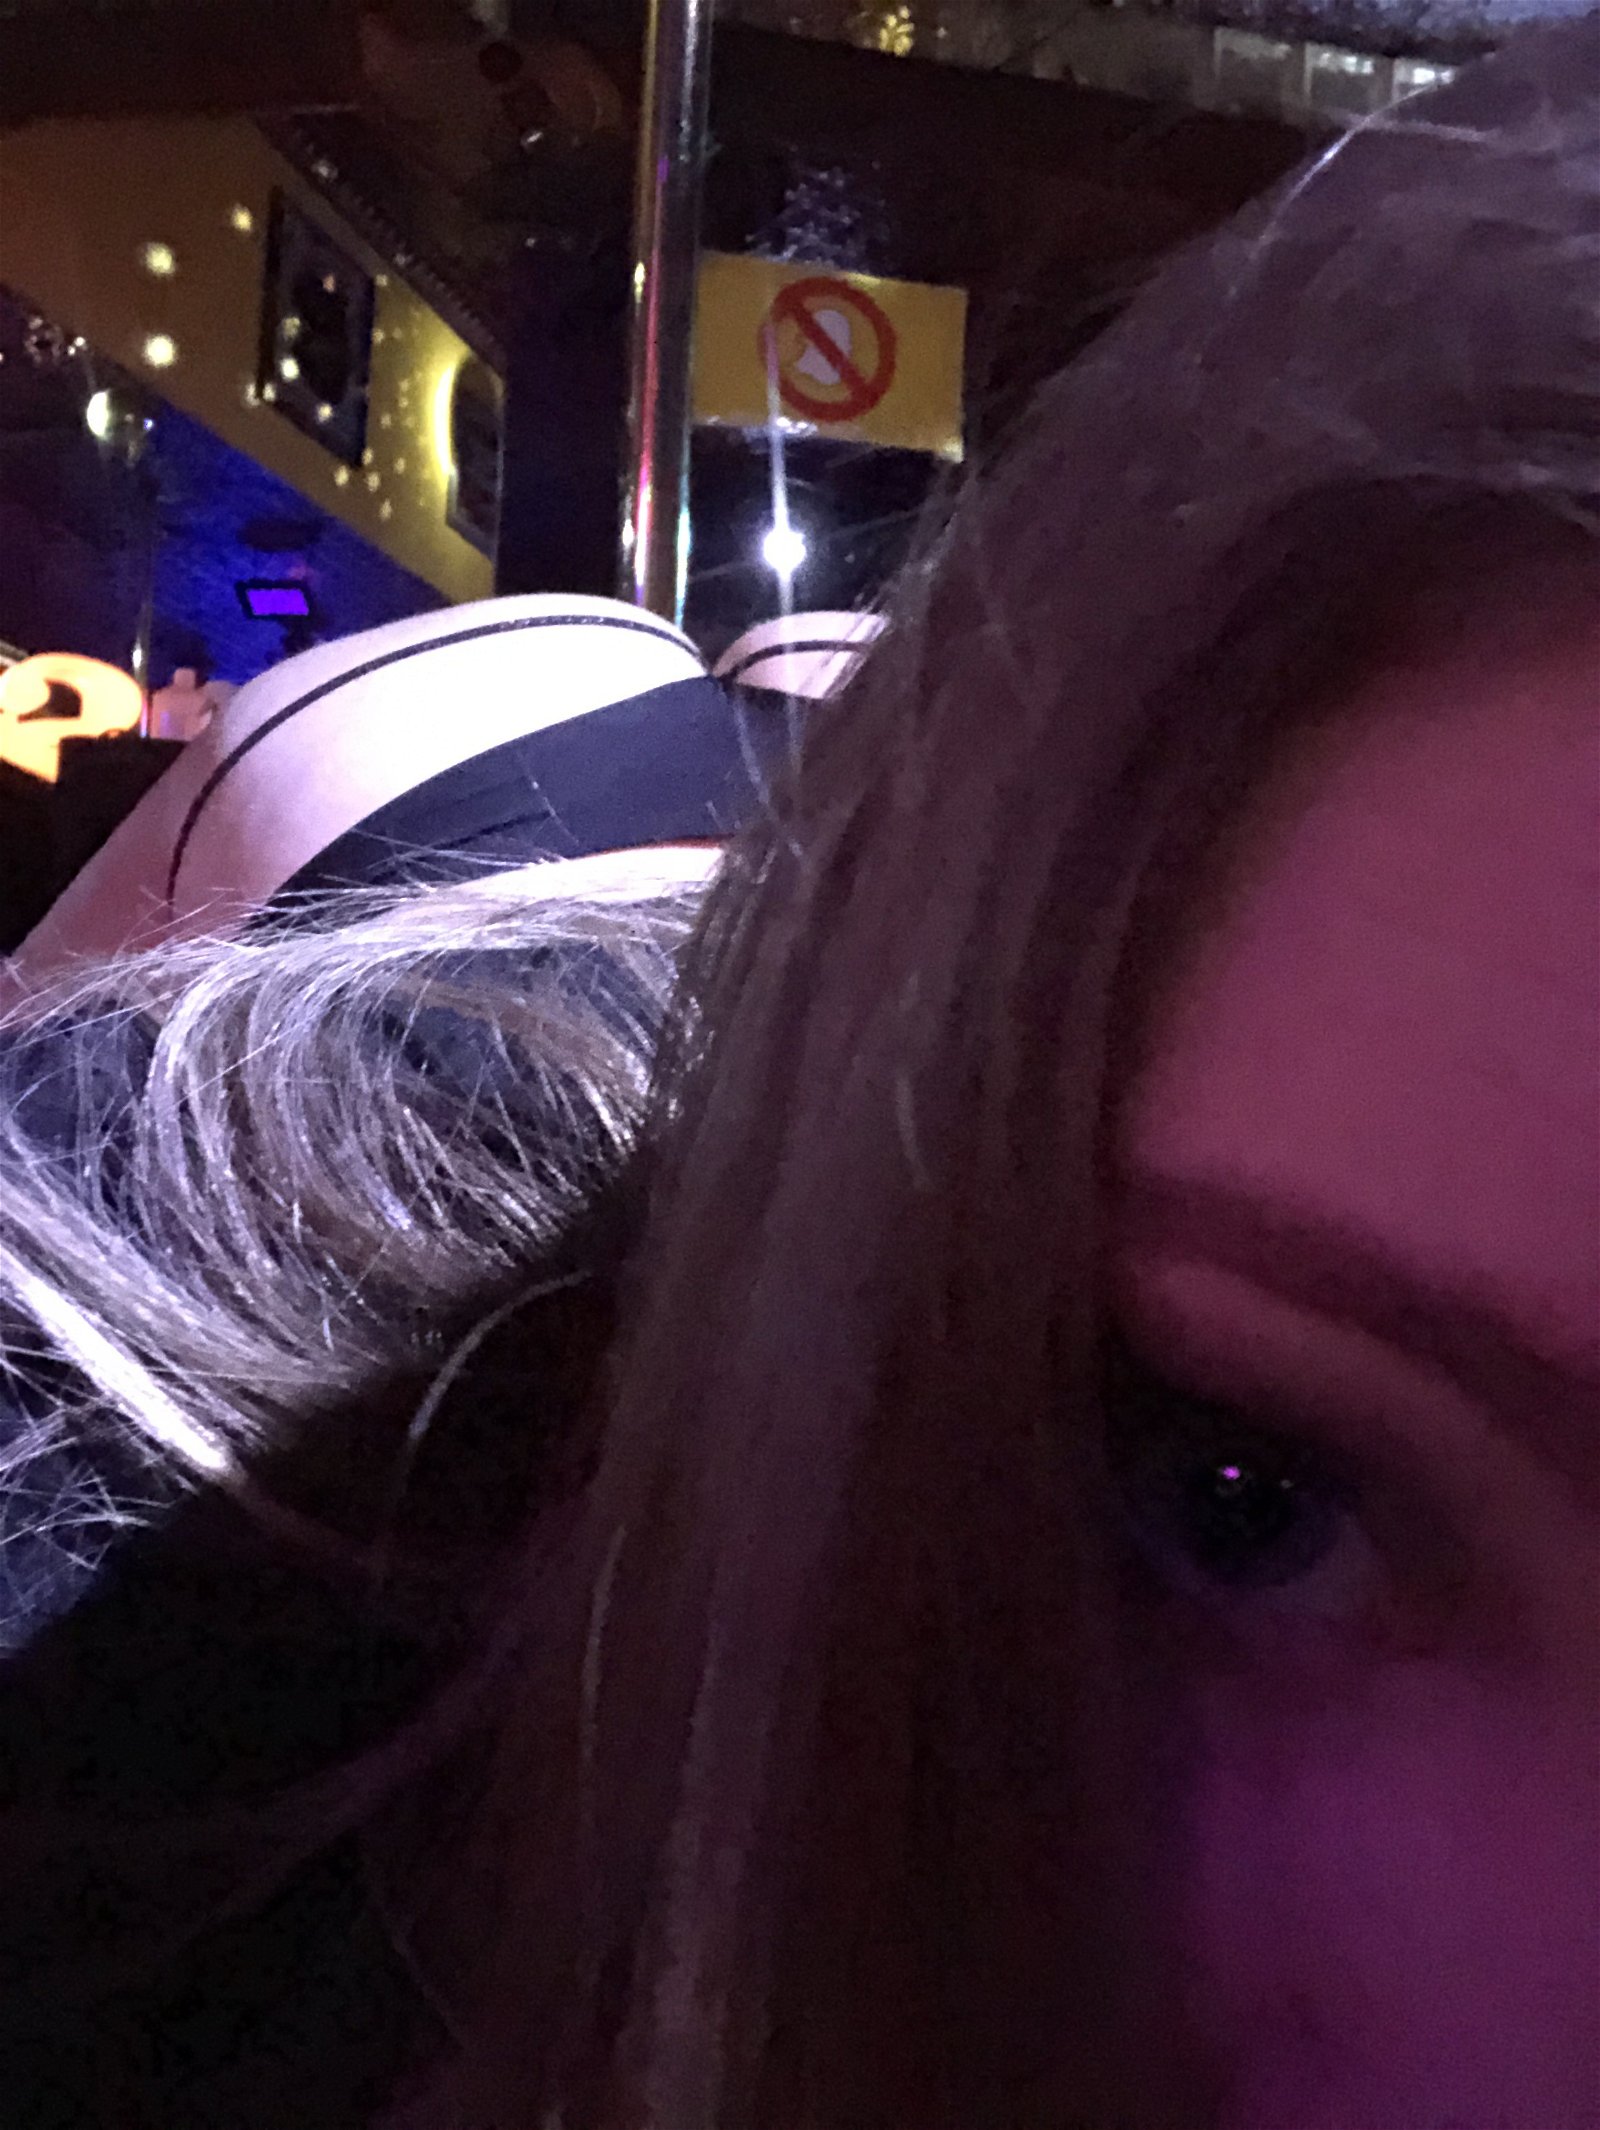 Watch the Photo by Stellarae68 with the username @Stellarae68, posted on February 19, 2020. The post is about the topic Ass. and the text says 'Booty. For more in depth photos and videos, shoot us a message and follow our Onlyfans page linked to our bio!'